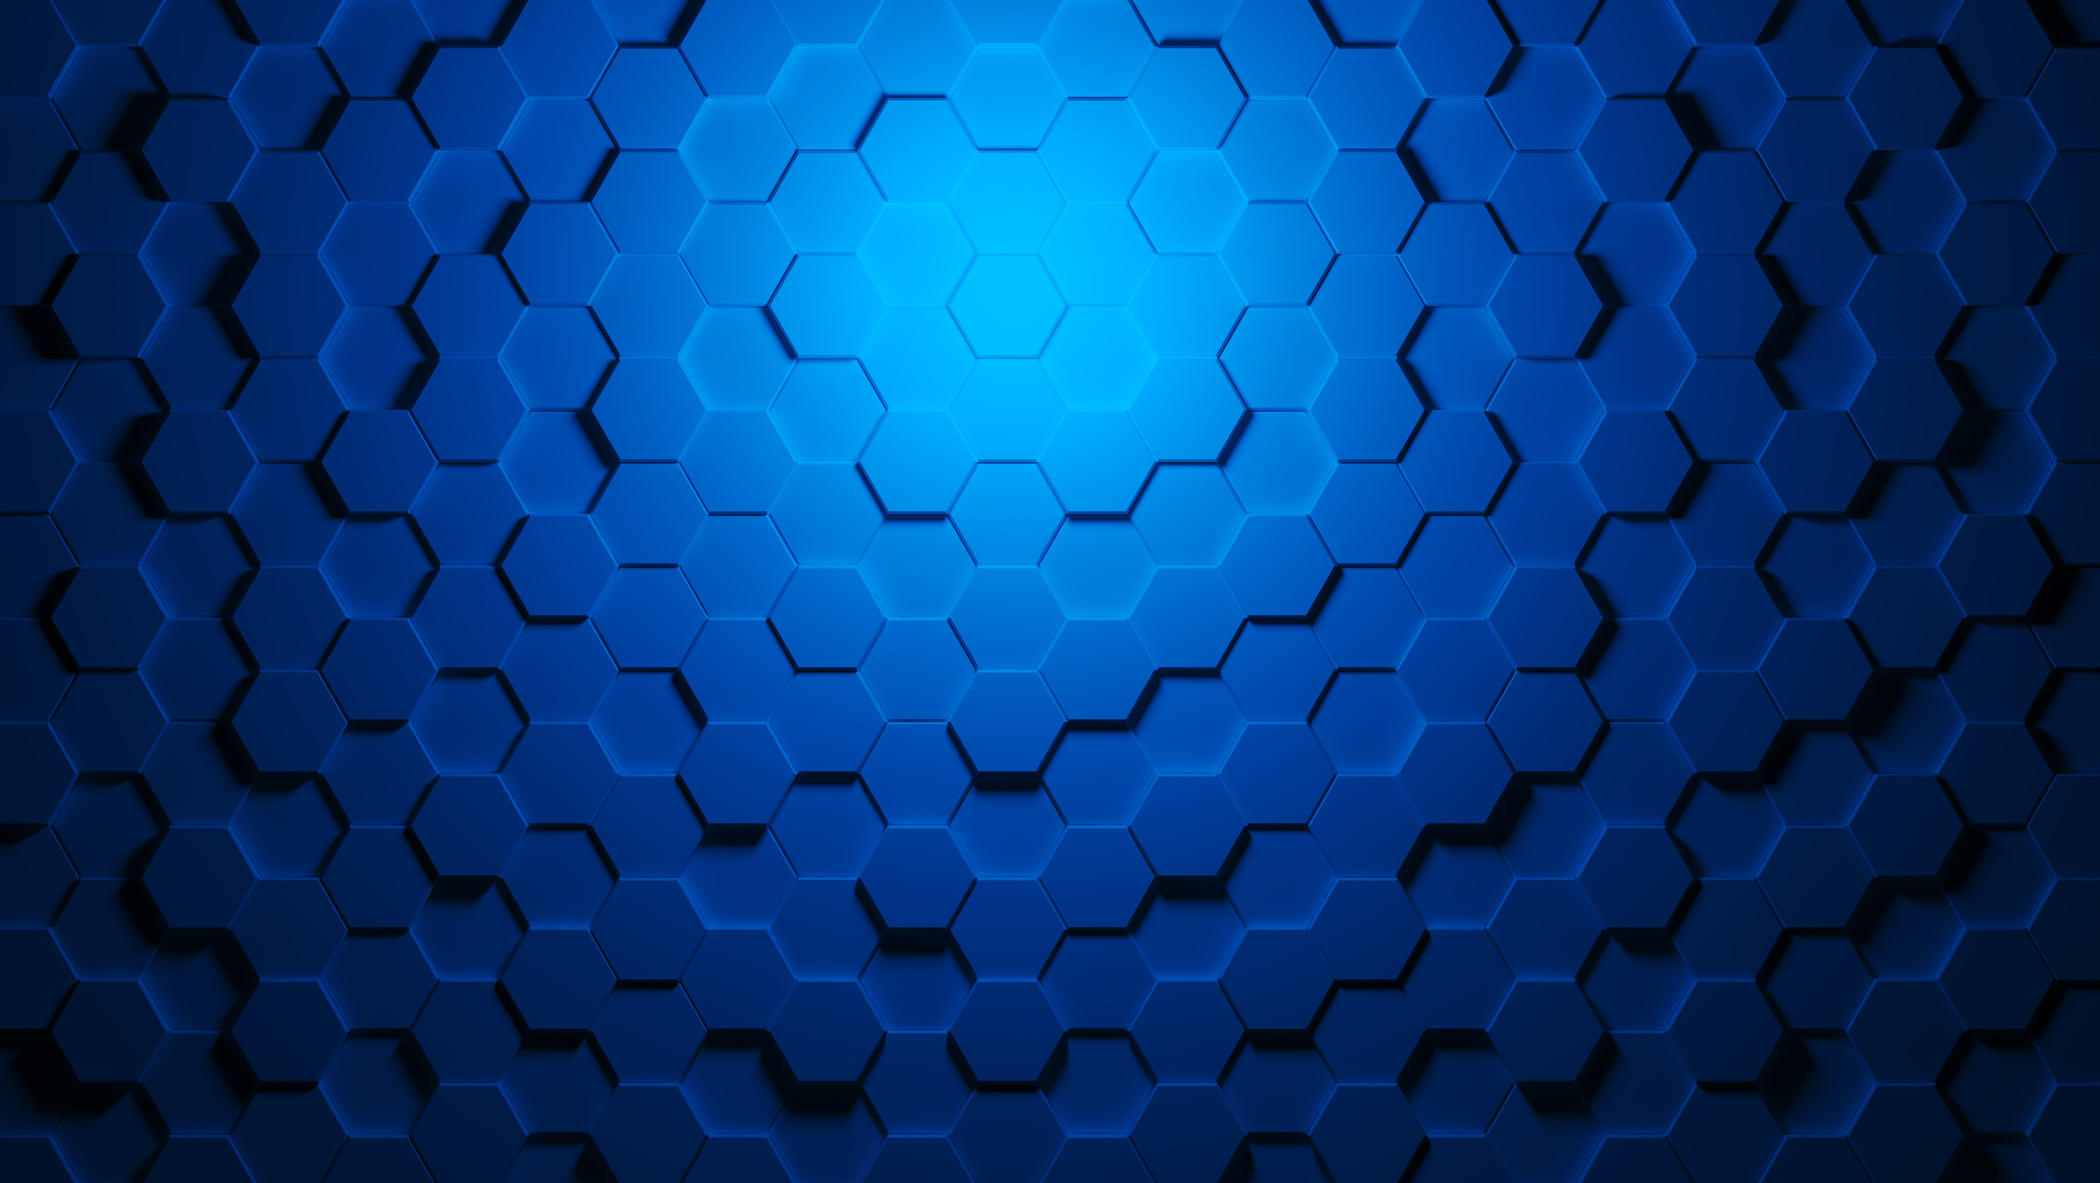 3D Rendering of Blue Octagons Background